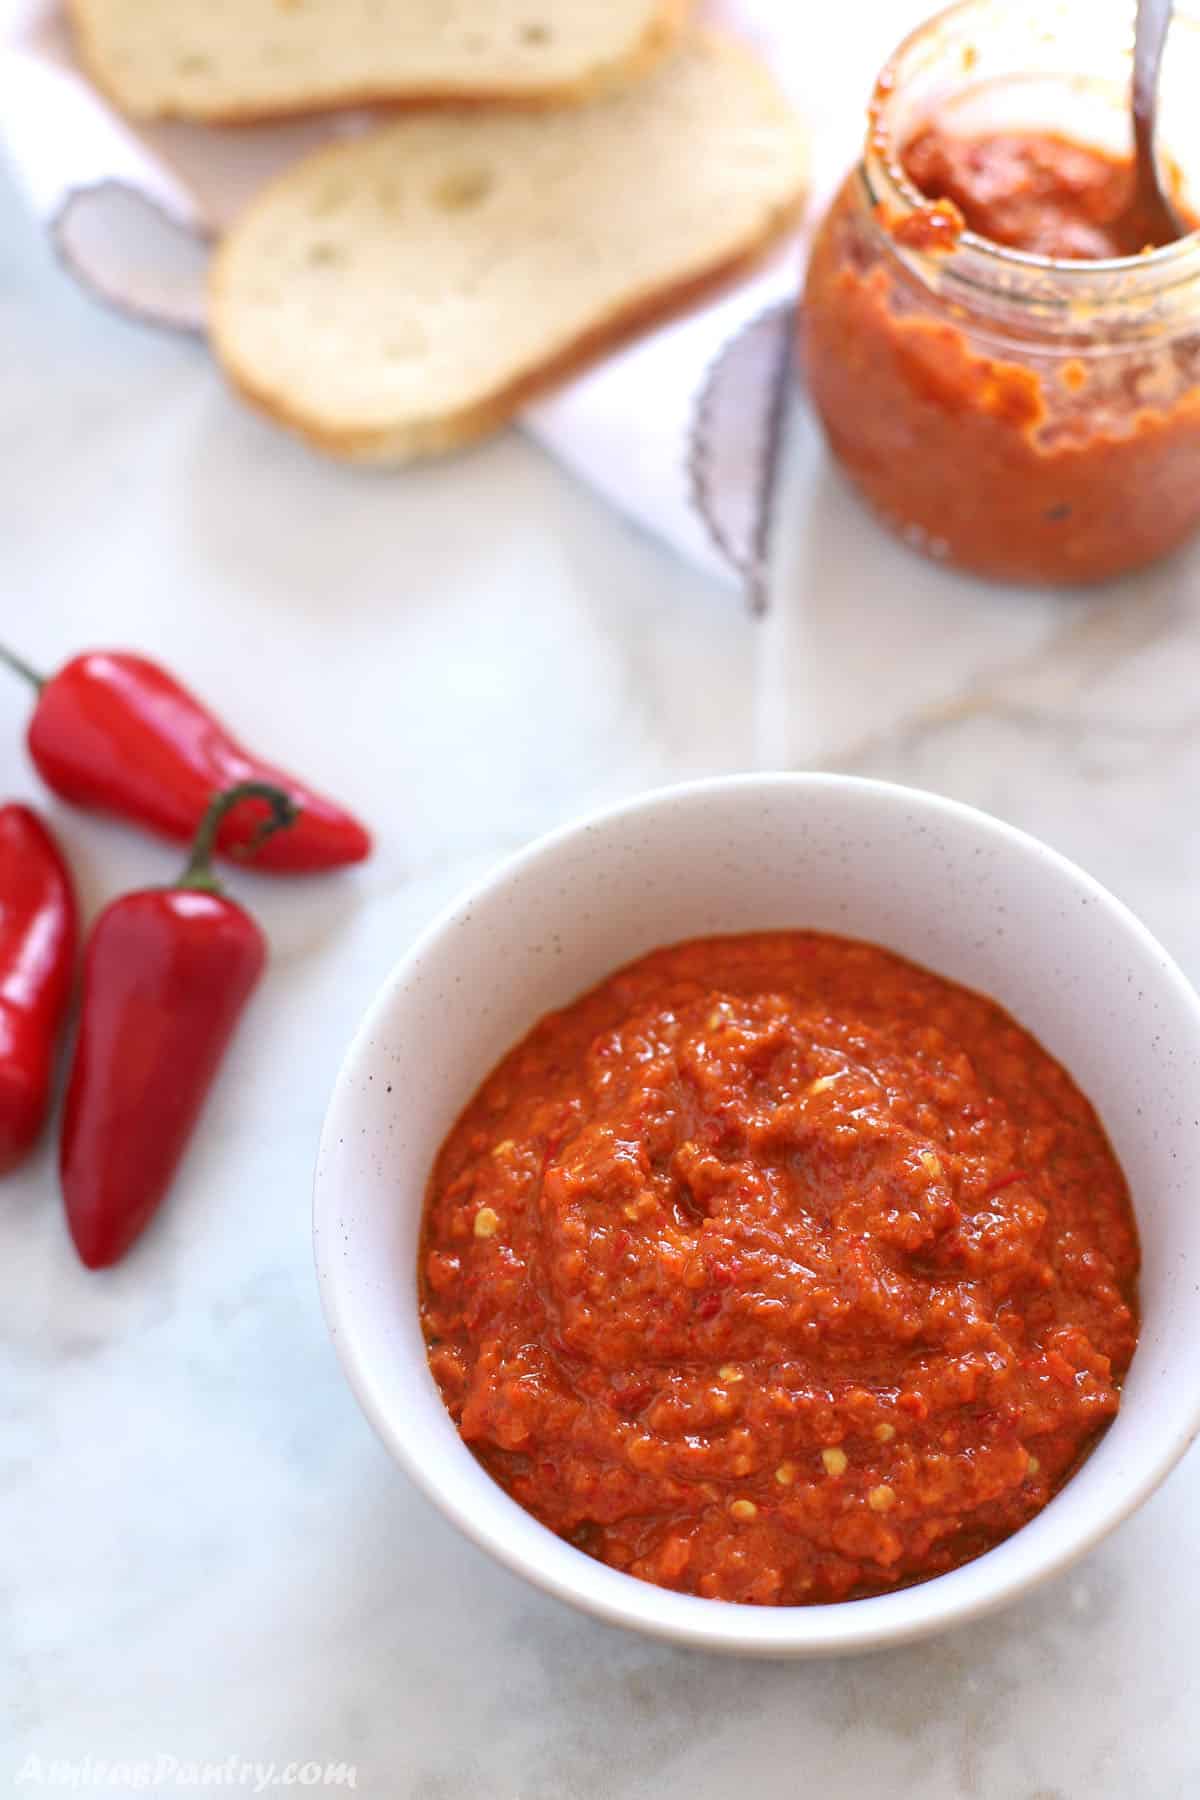 Harissa in a white bowl with a jar half empty in the back, bread and some red peppers all placed on a marble white table.